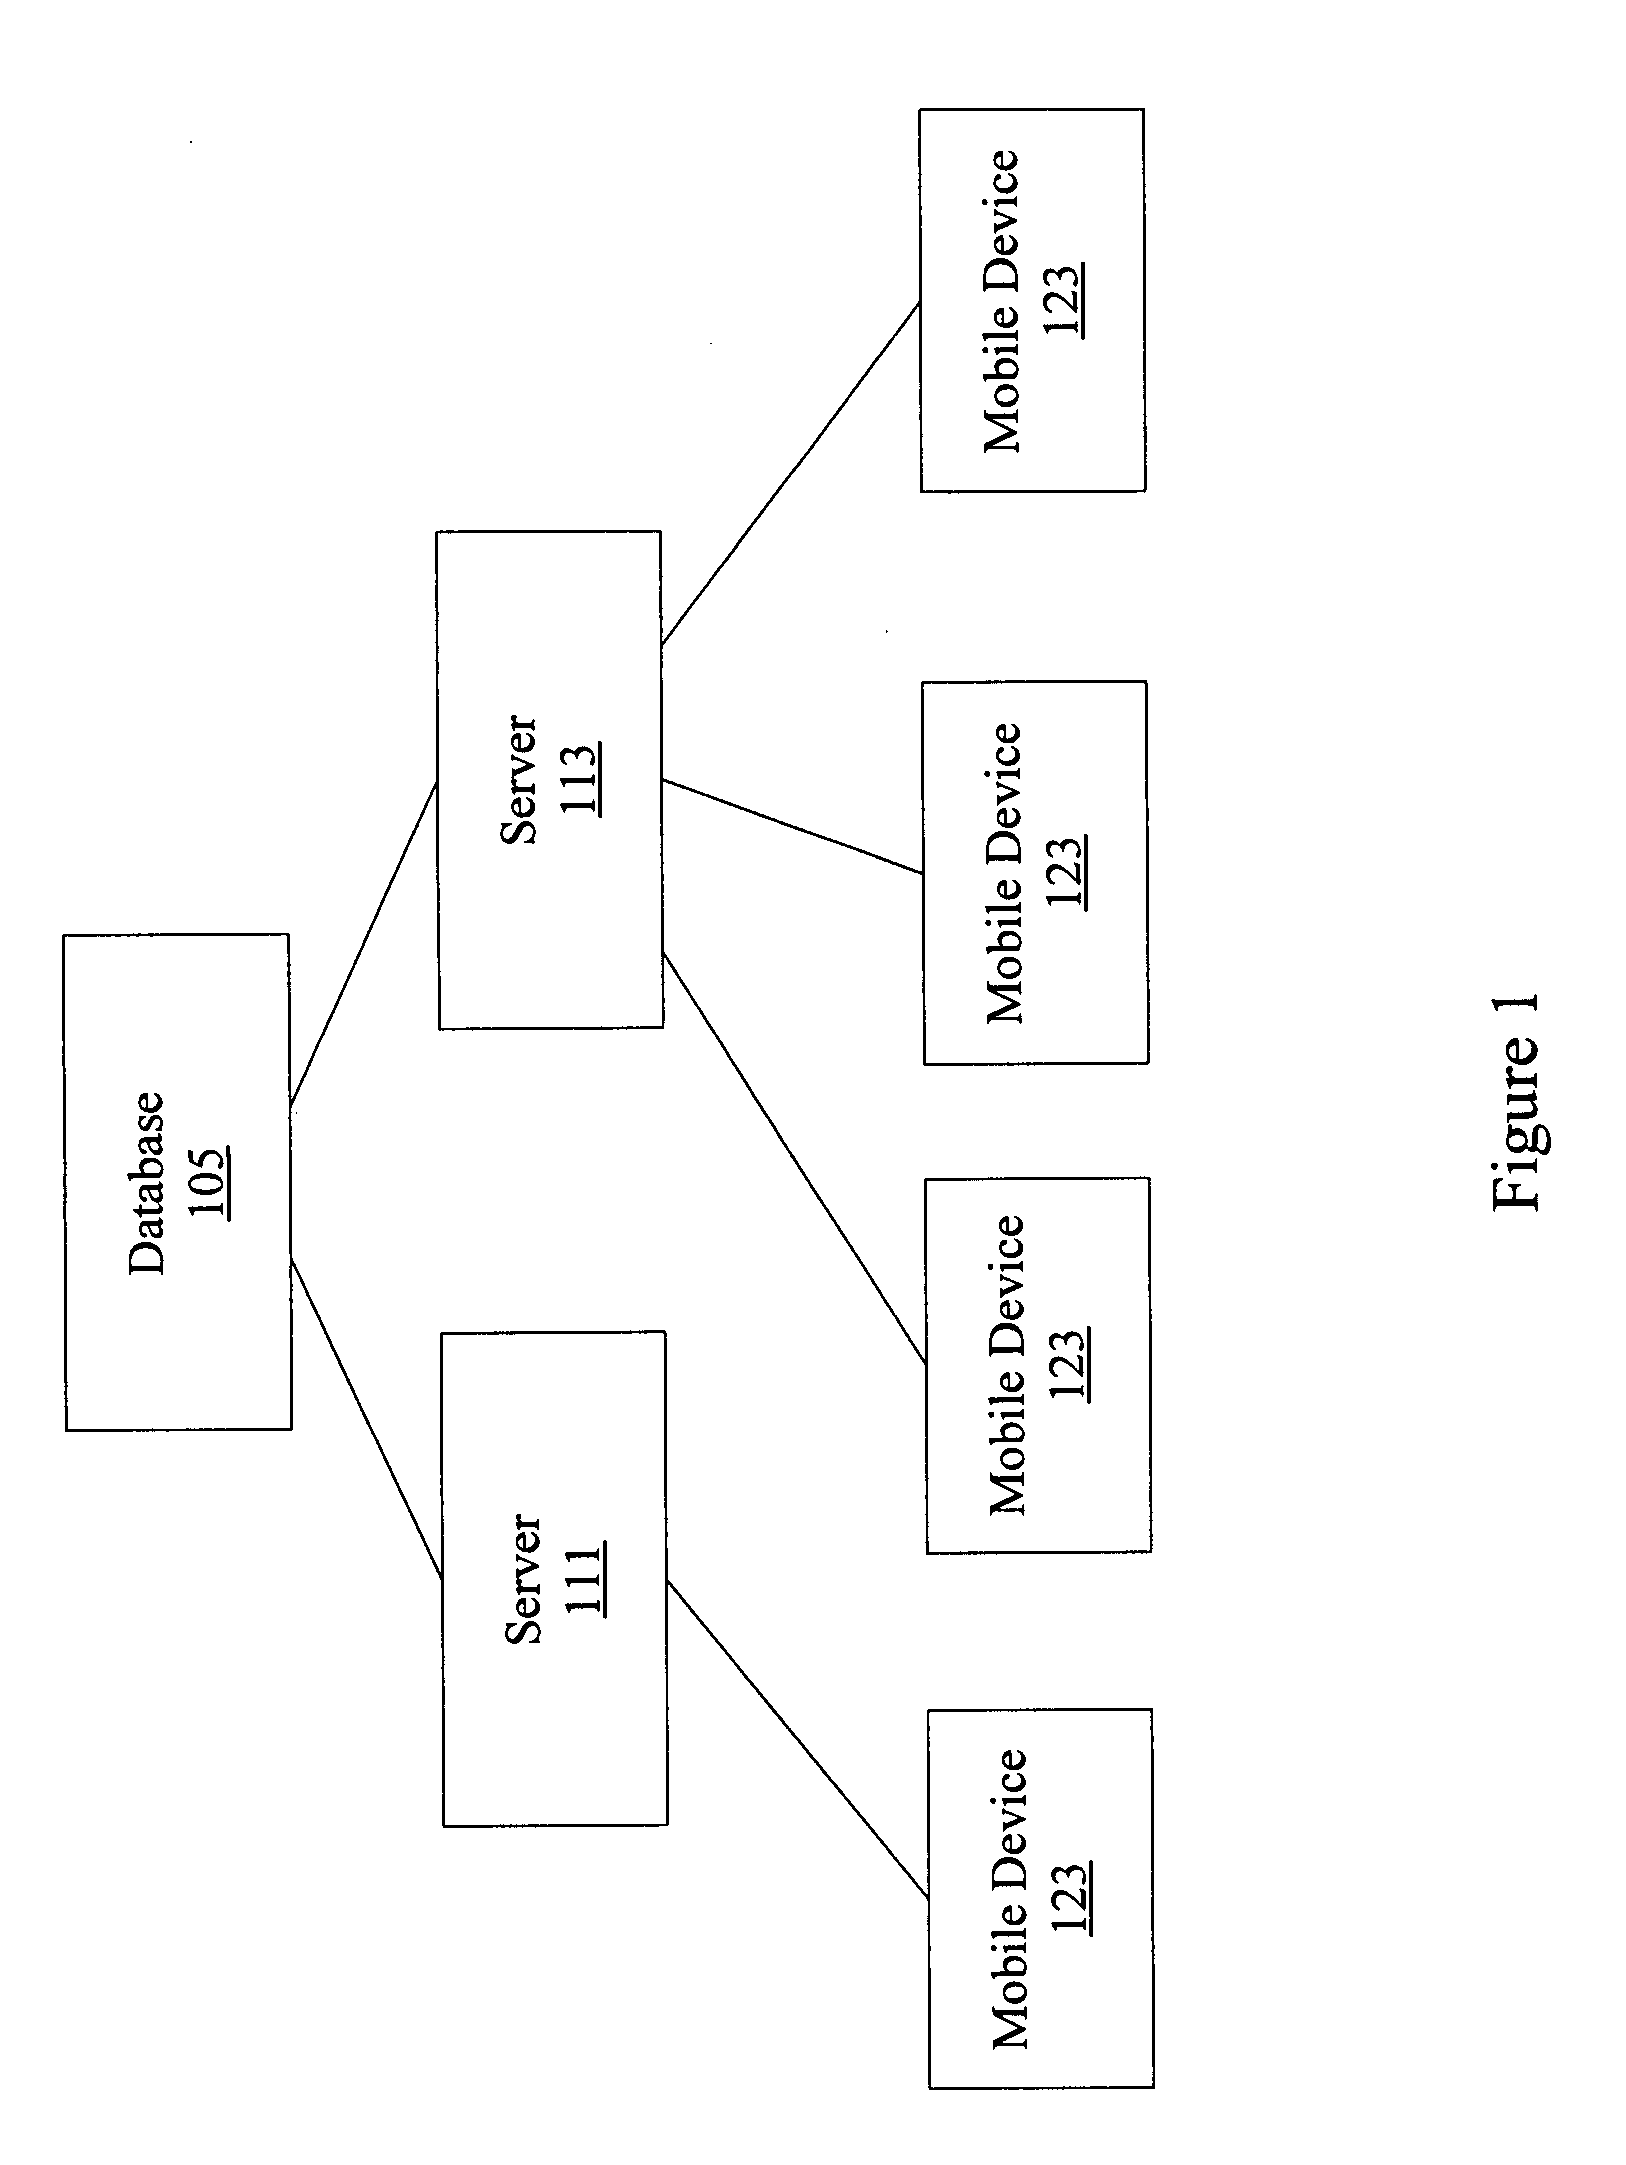 Maintaining session state information in a client server system